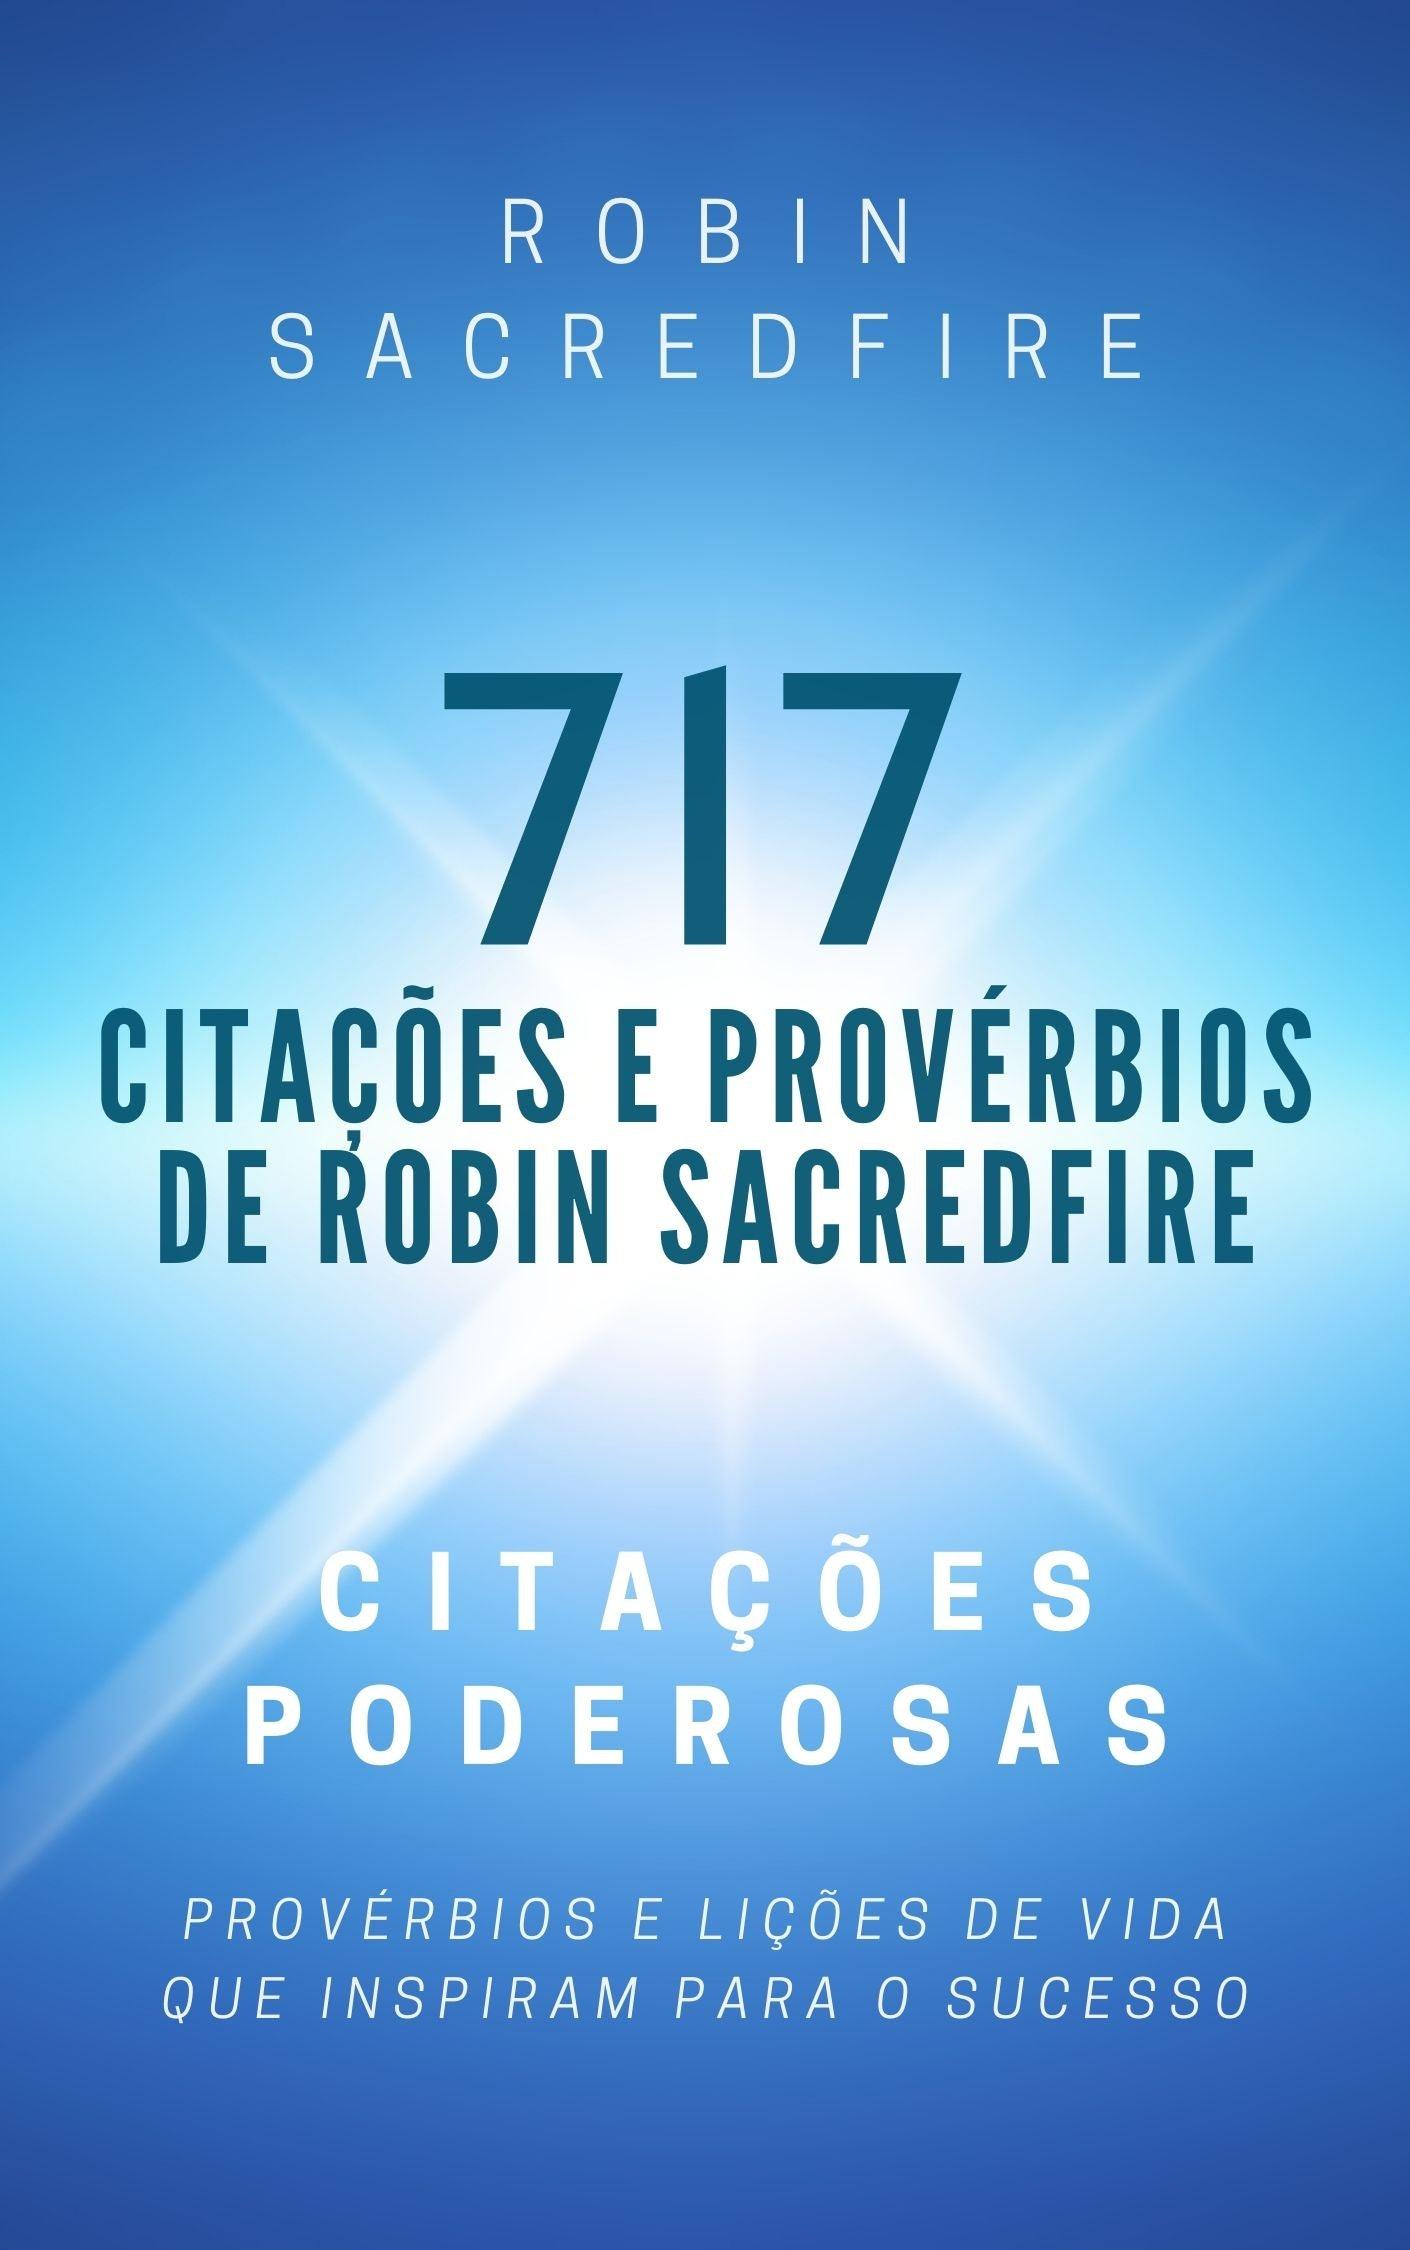 717 Quotes and Sayings of Robin Sacredfire Portuguese